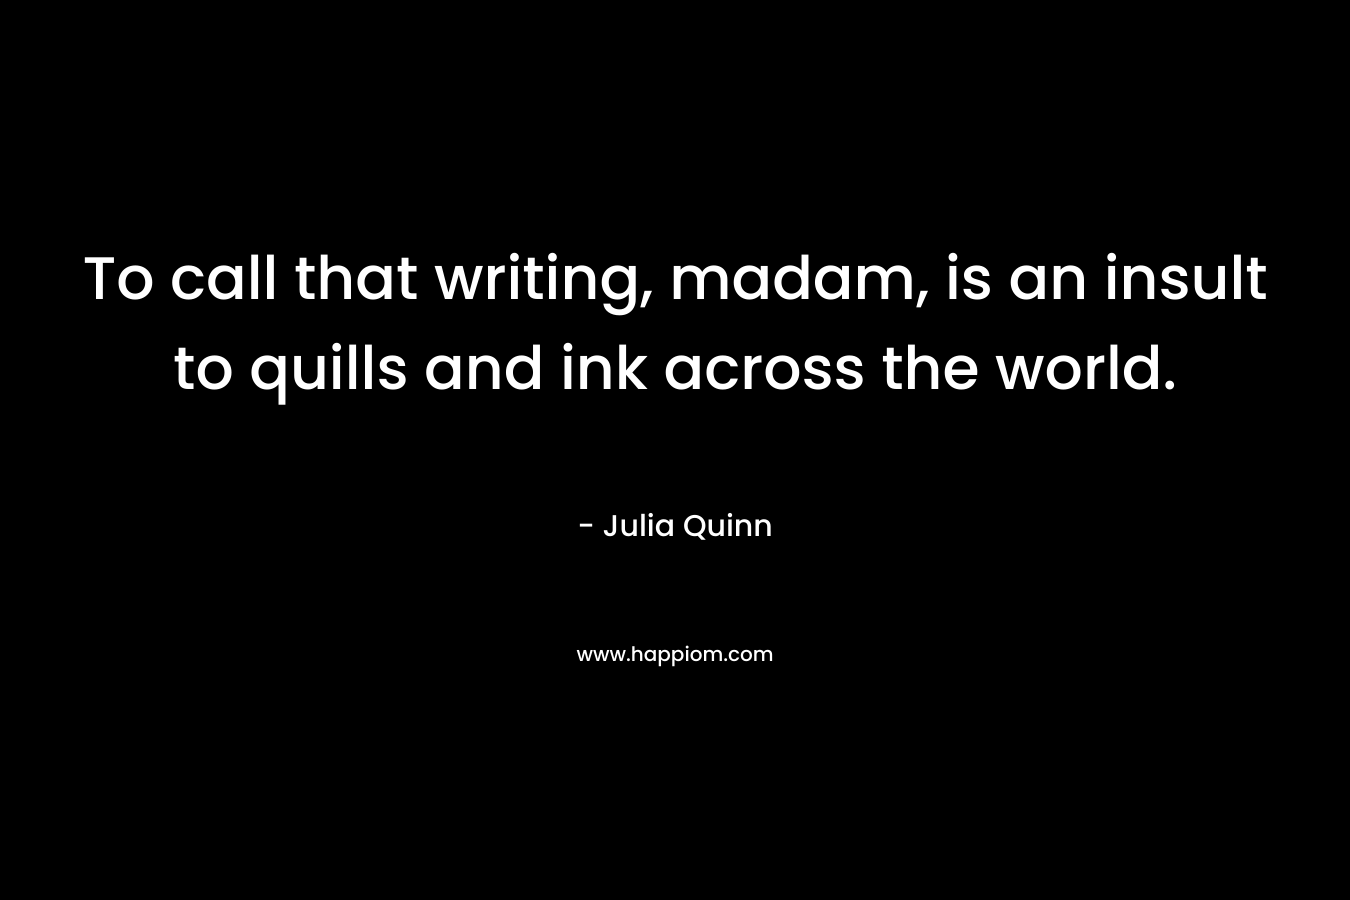 To call that writing, madam, is an insult to quills and ink across the world.